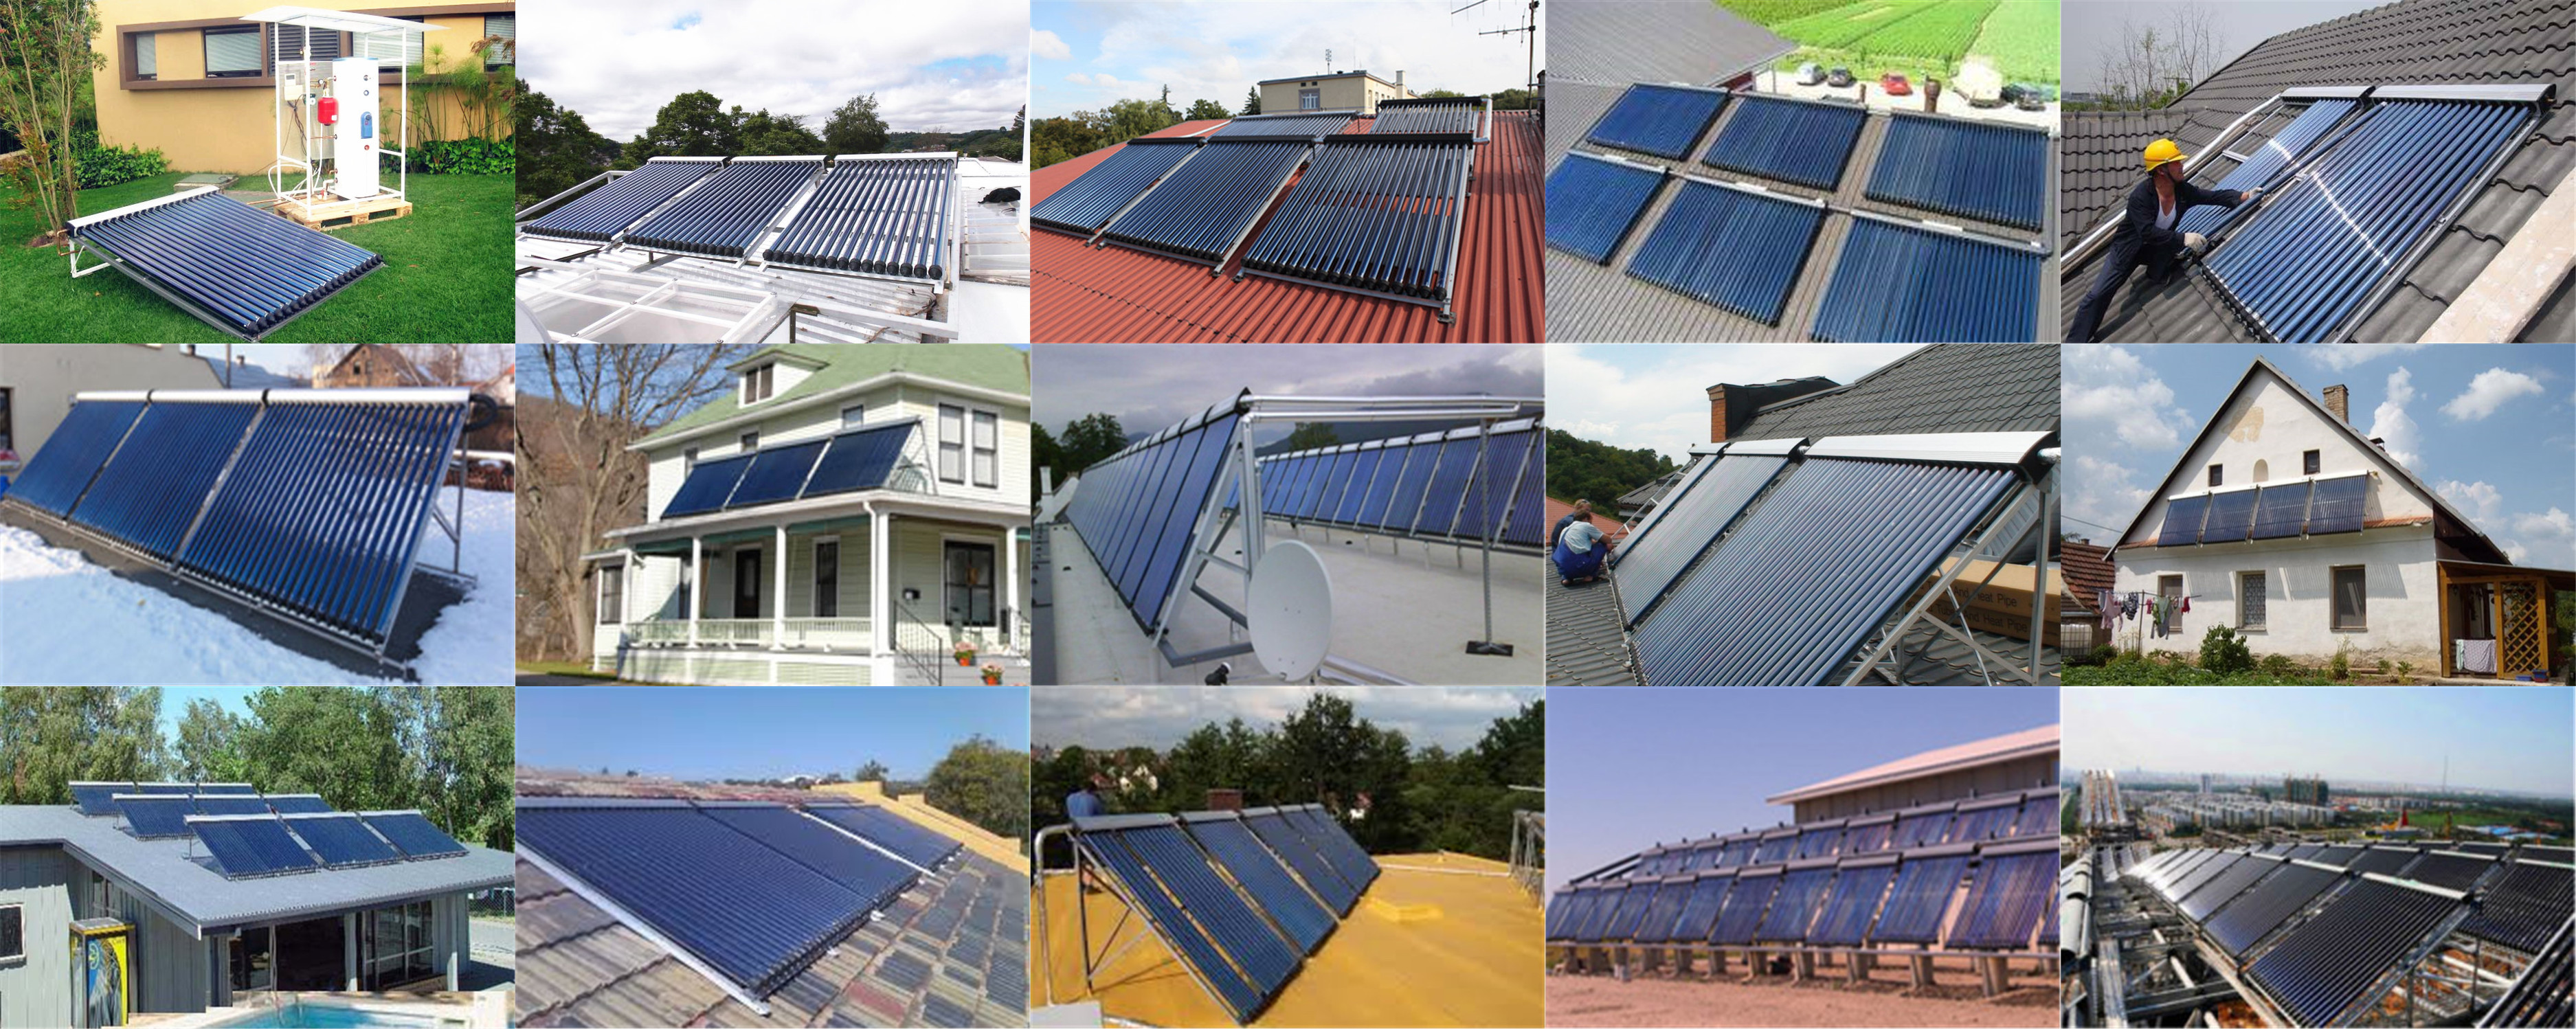 Evacuated Tube Solar Collector System, Heat Pipe Vacuum Tube Solar Collector, Glass Tube Solar Panel for Hot Water Heating